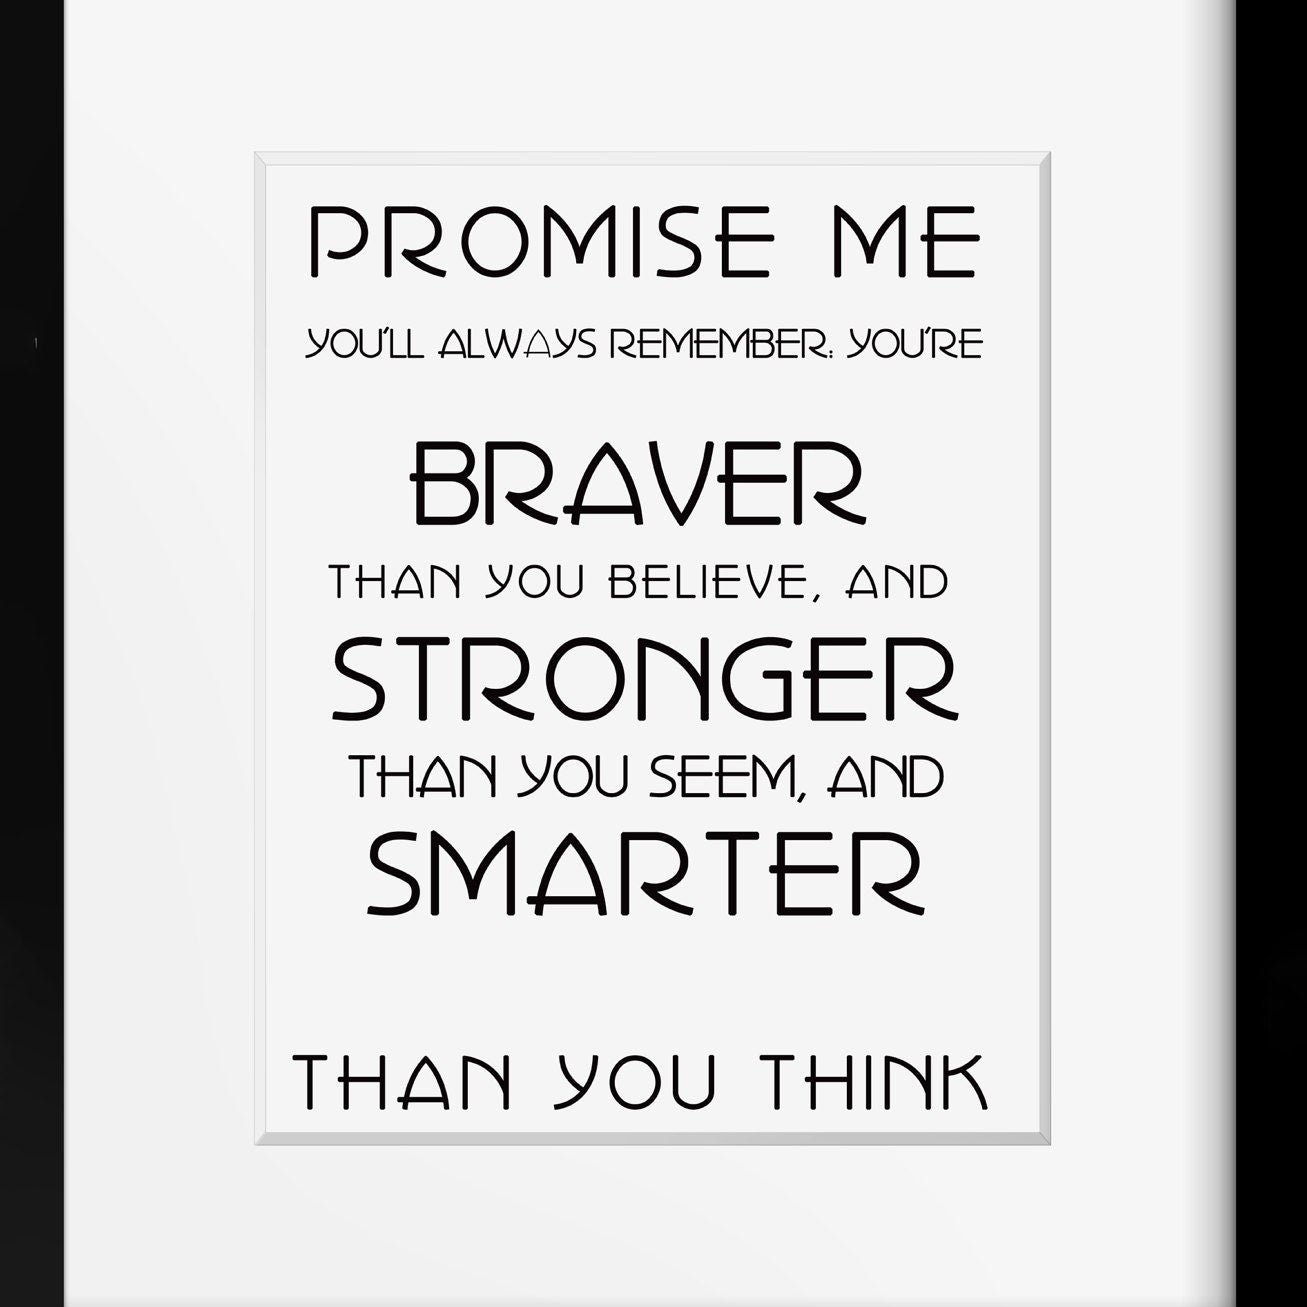 Promise Me Braver Stronger Smarter Winnie The Pooh Art Print, AA Milne Quote Unframed Inspirational Poster